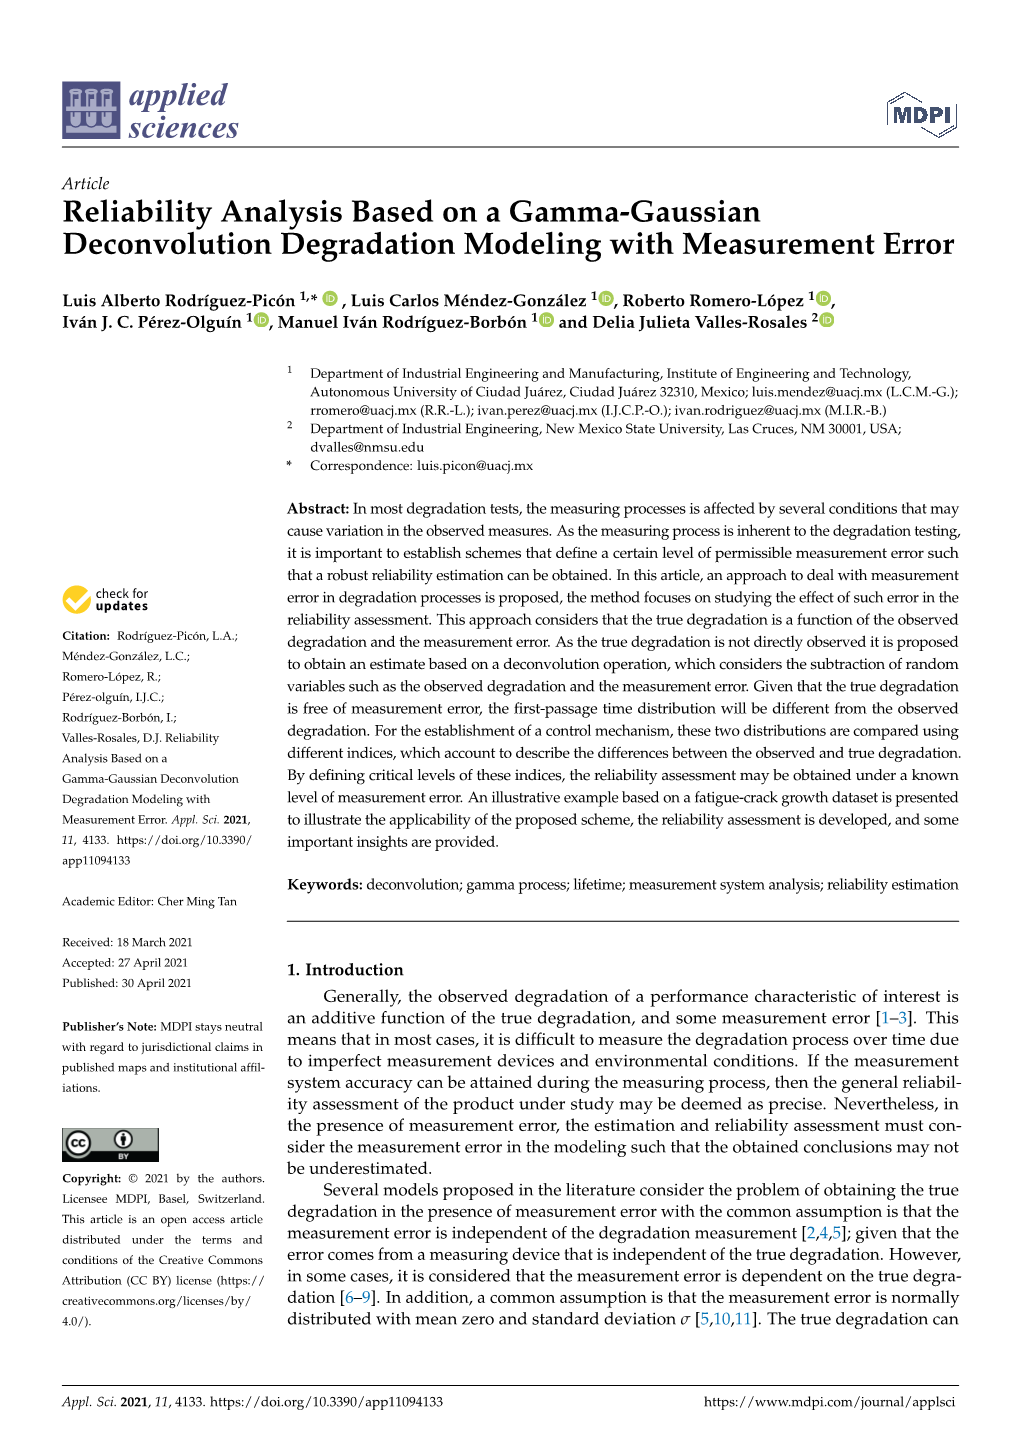 Reliability Analysis Based on a Gamma-Gaussian Deconvolution Degradation Modeling with Measurement Error